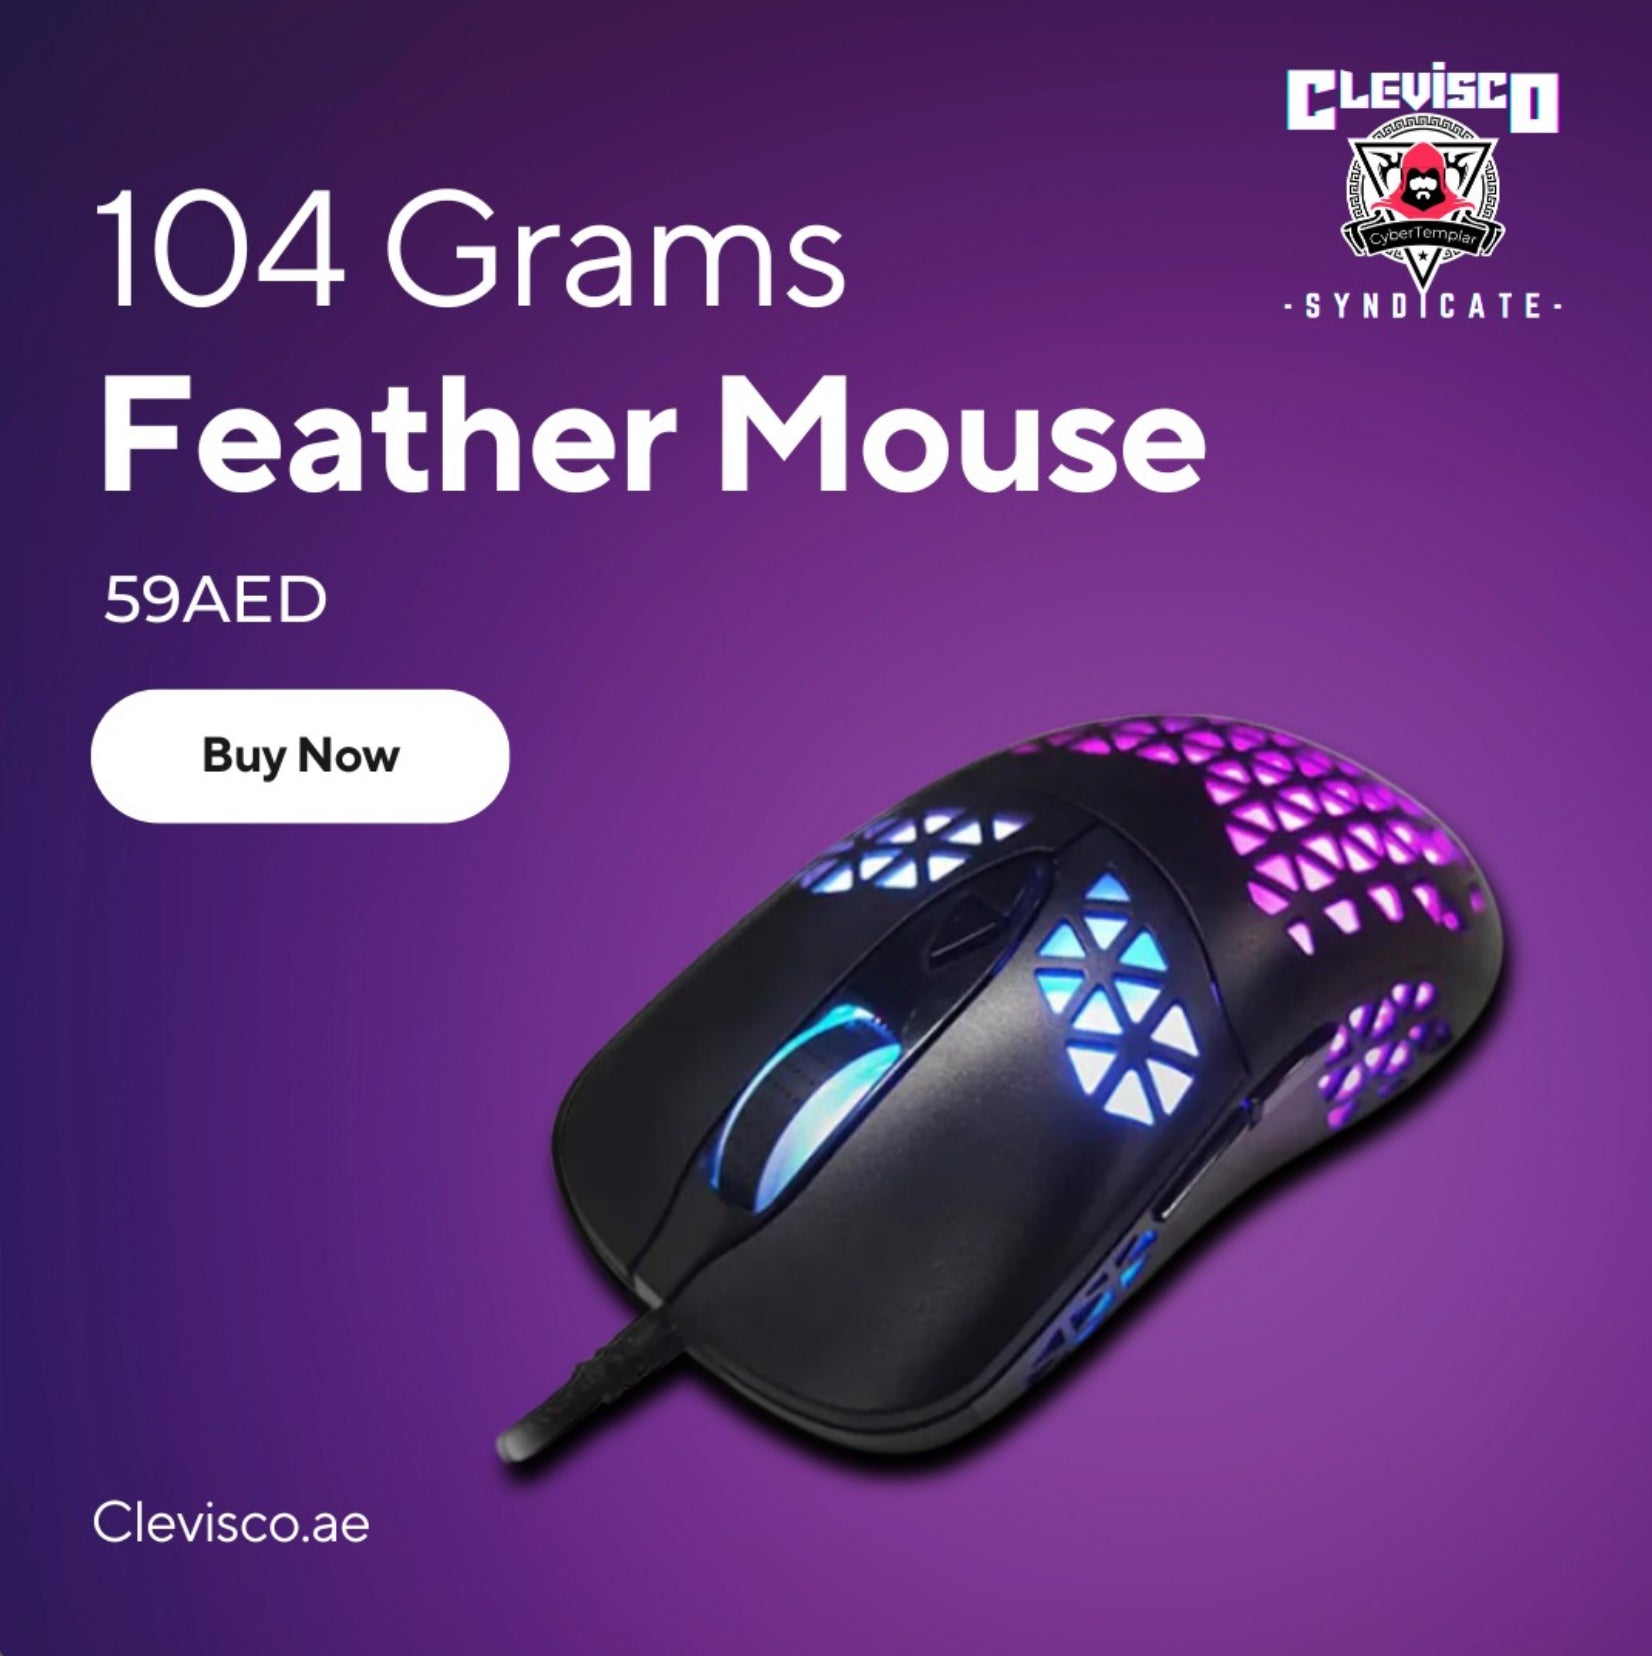 An Infograghic for the Clevisco Feather Mouse a lightweight RGB Gaming Mouse that weighs 104 grams an priced at 59AED with Buy Now toggle Button.